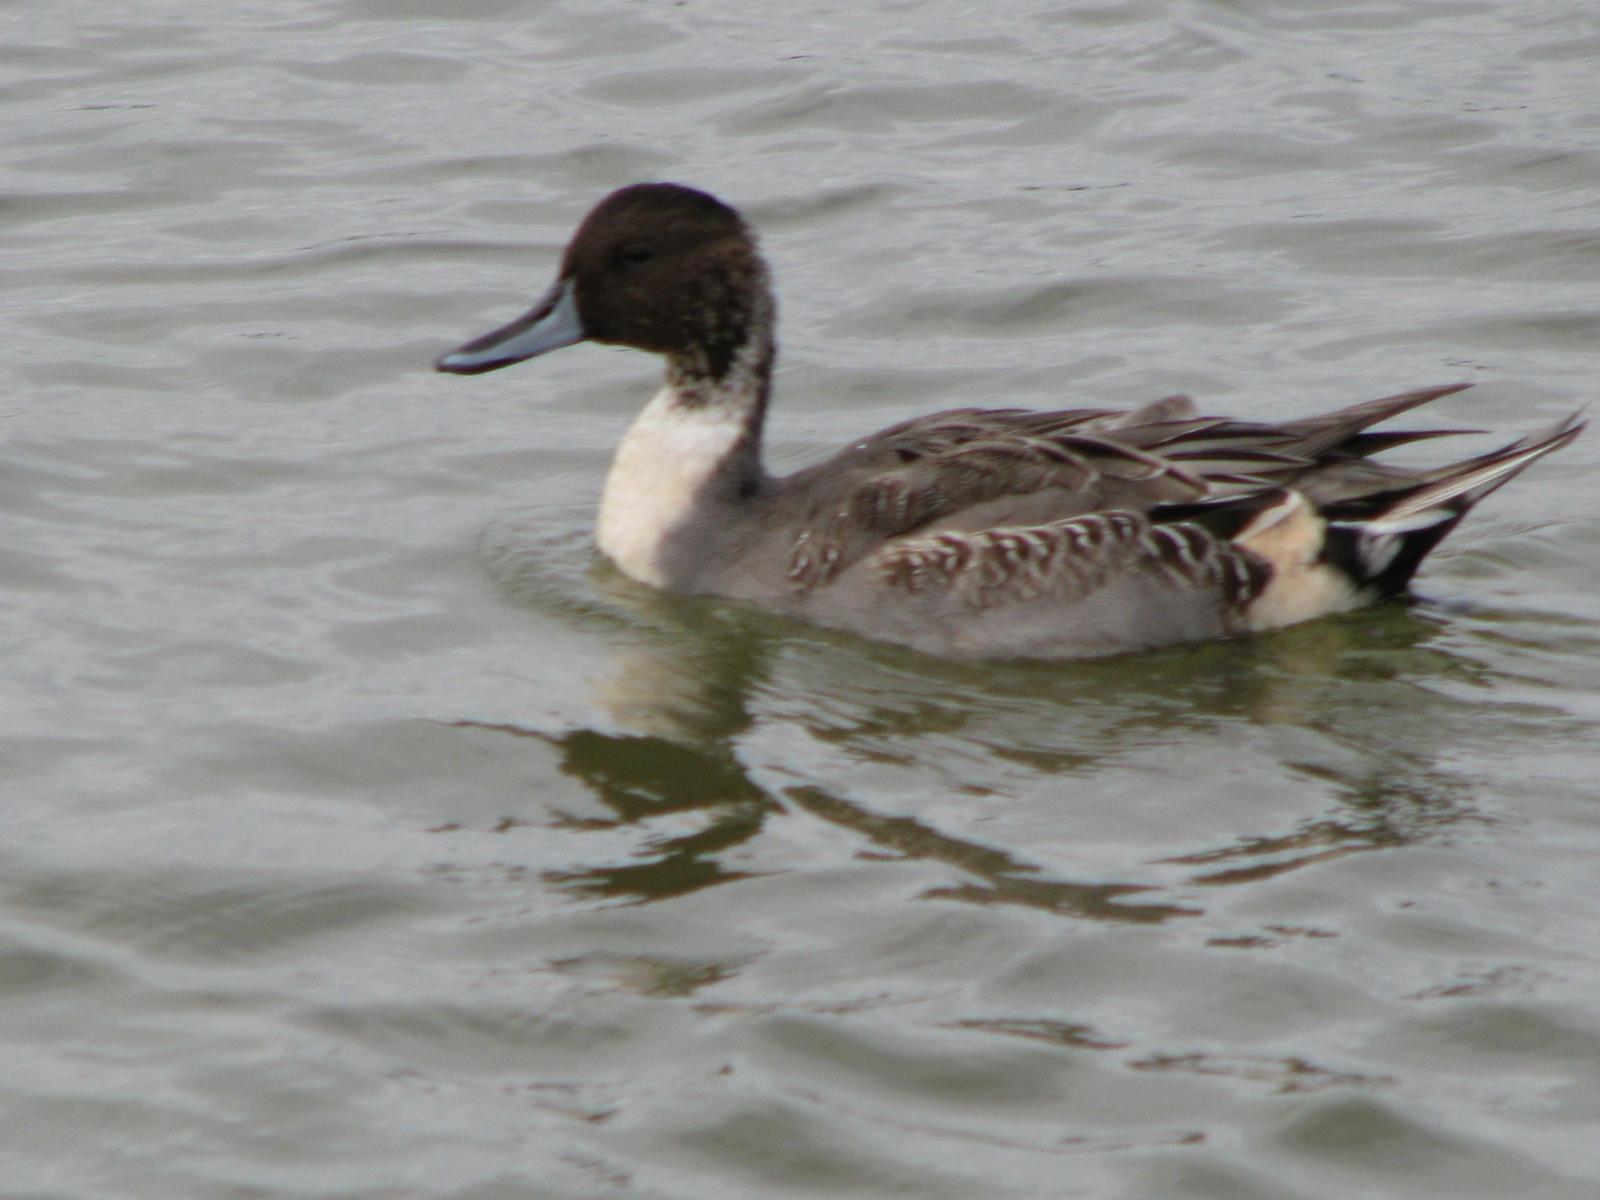 Northern Pintail Photo by Ted Goshulak